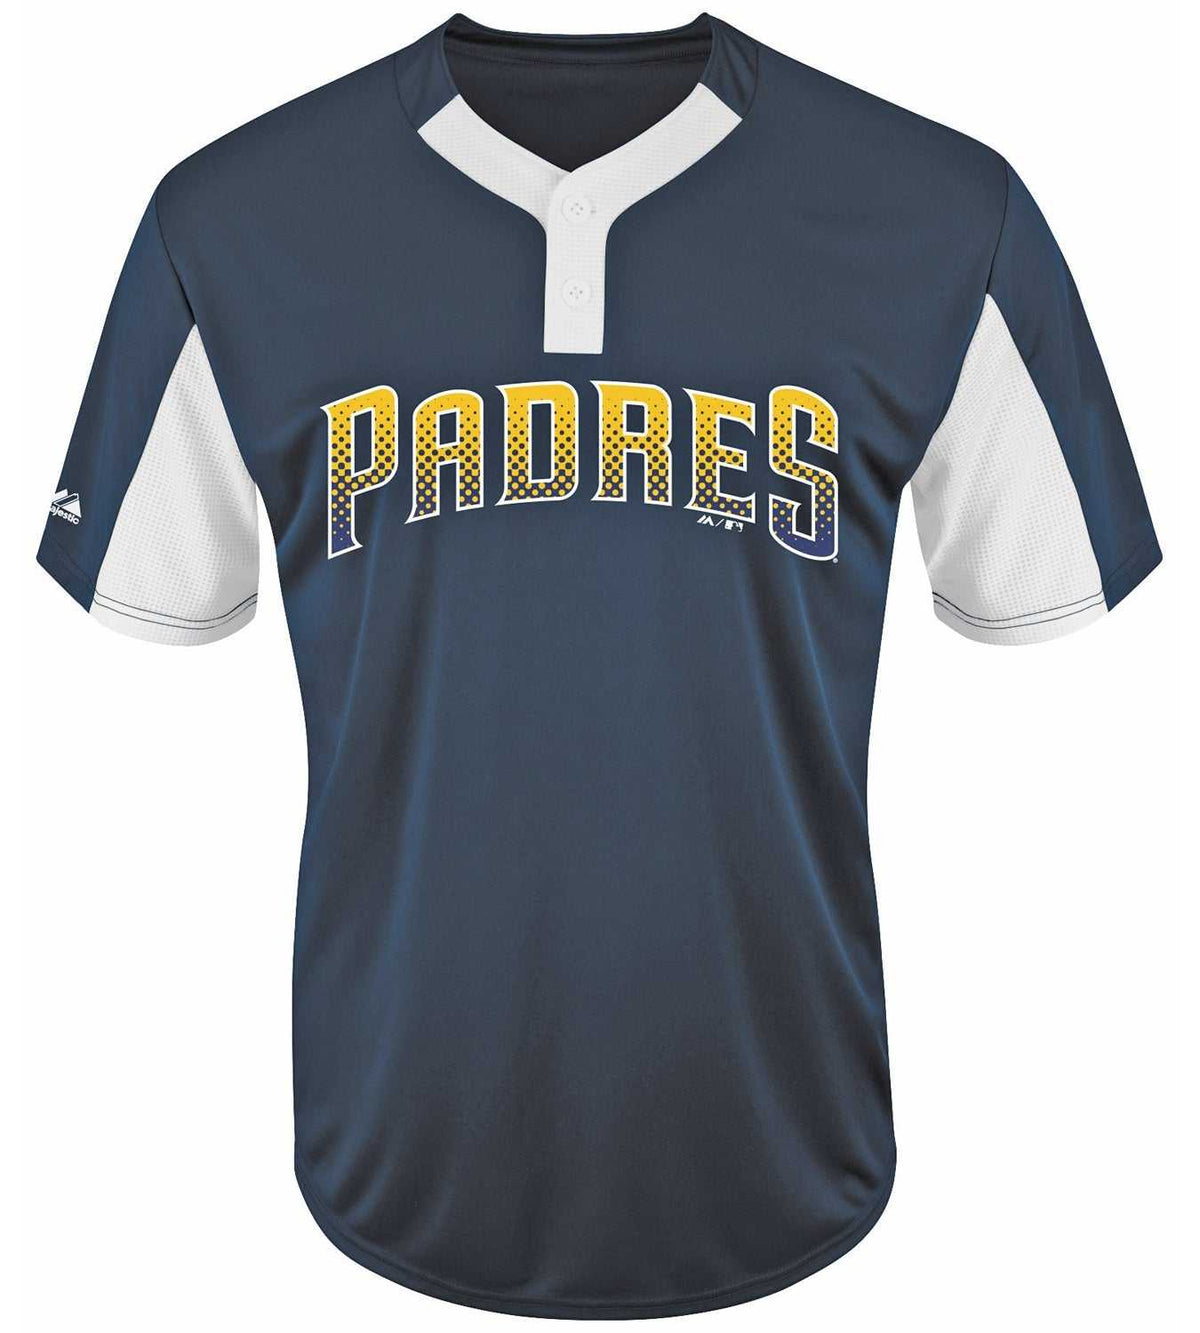 Majestic IY83-I383 MLB Premier Eagle 2-Button Jersey - SD Padres - HIT a Double